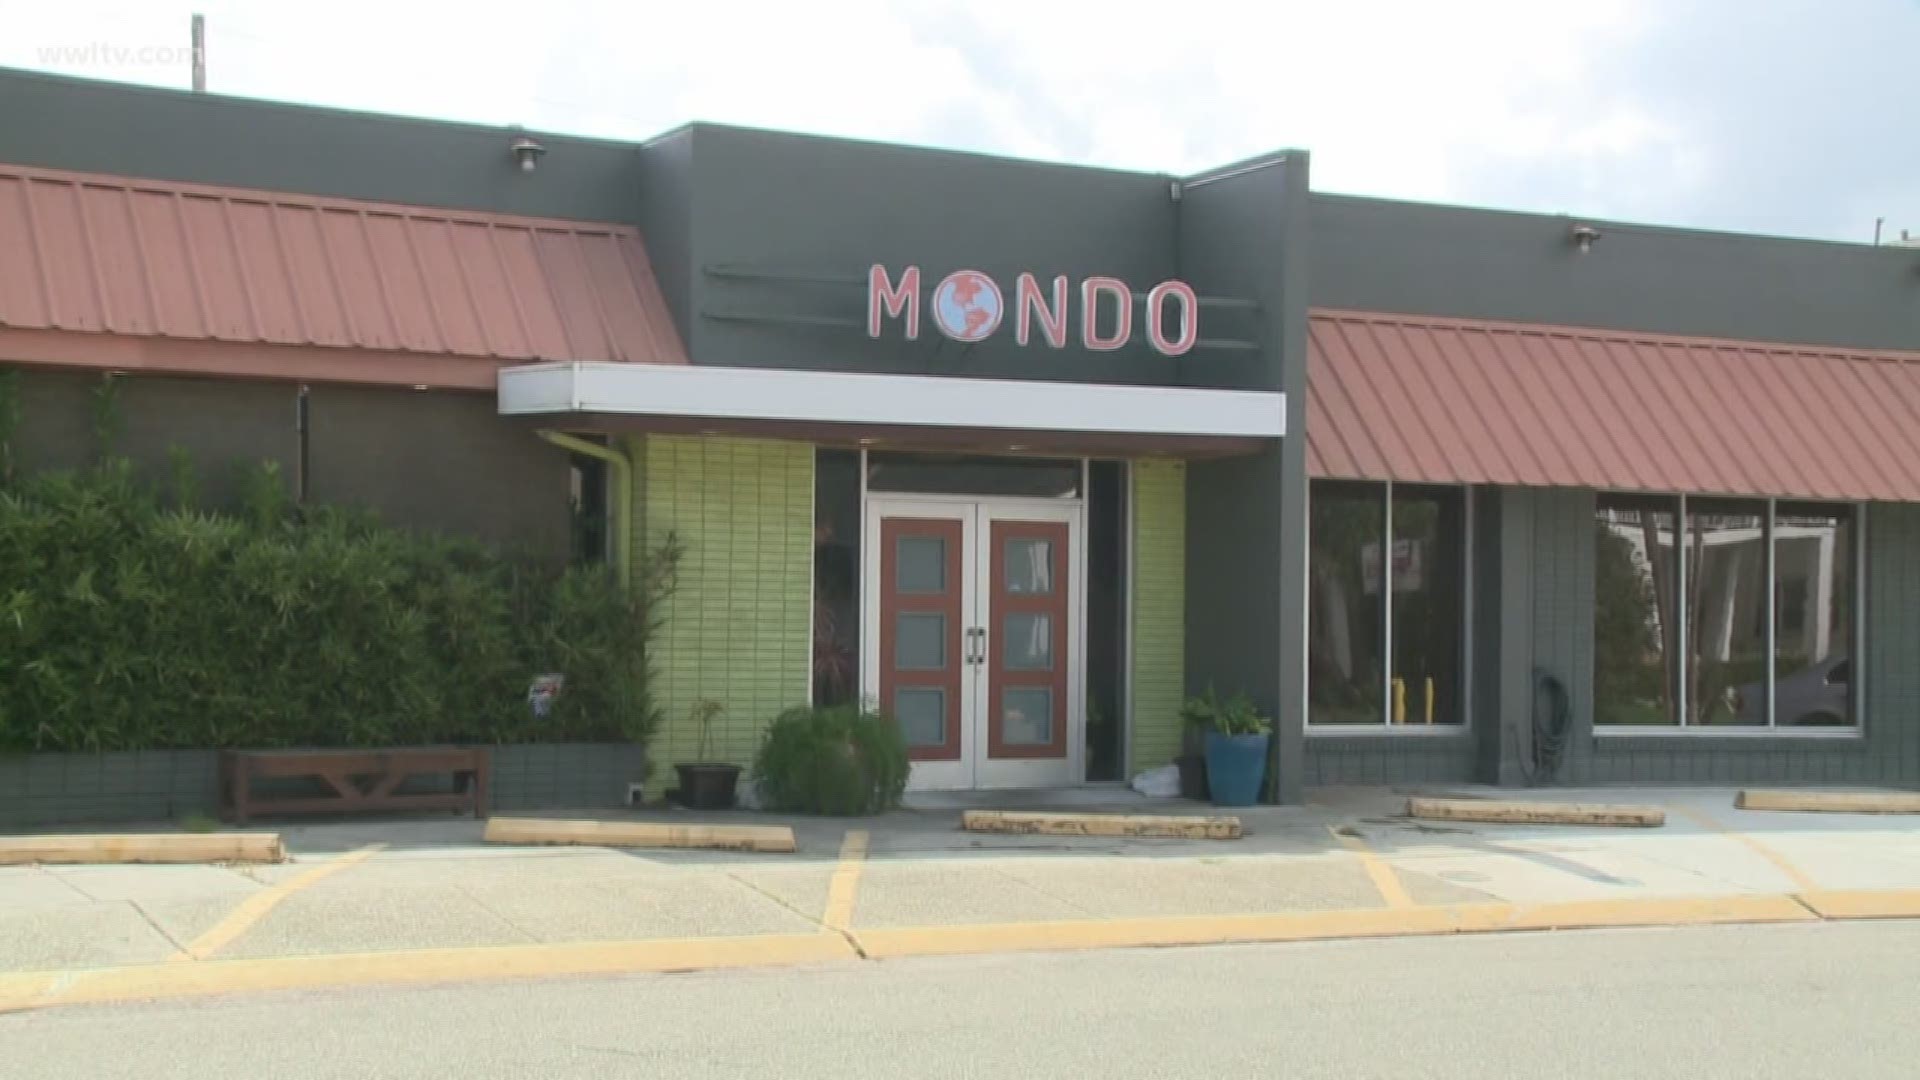 James Beard Award-winning Chef Susan Spicer announced Friday that she's closing her Lakeview restaurant next week. Mondo opened in 2010 to give the area a boost after Hurricane Katrina.